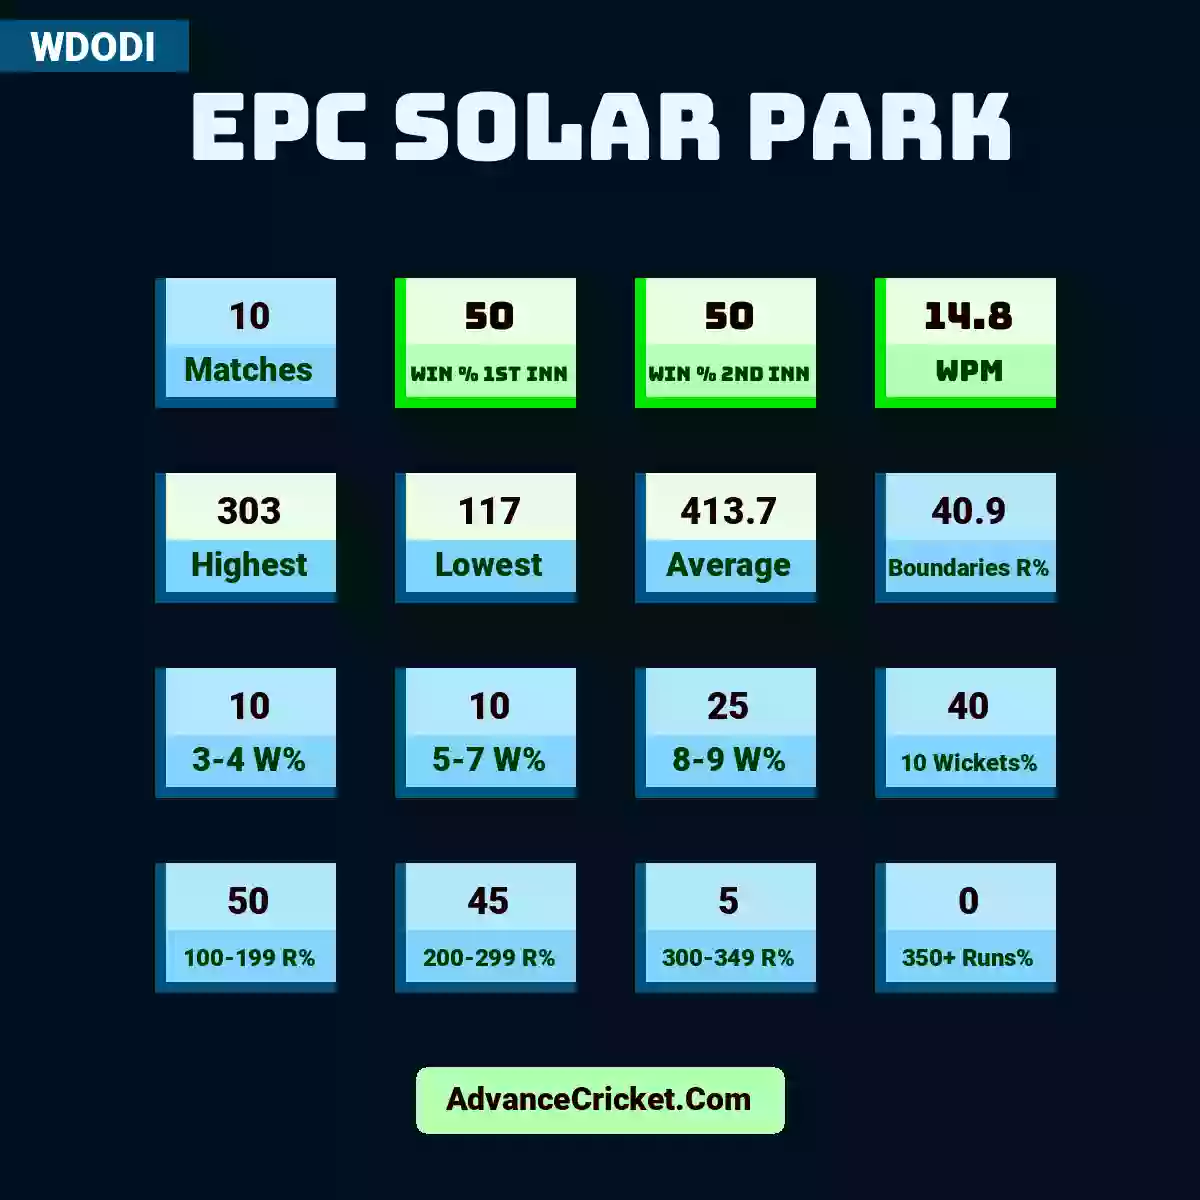 Image showing EPC Solar Park with Matches: 10, Win % 1st Inn: 50, Win % 2nd Inn: 50, WPM: 14.8, Highest: 303, Lowest: 117, Average: 413.7, Boundaries R%: 40.9, 3-4 W%: 10, 5-7 W%: 10, 8-9 W%: 25, 10 Wickets%: 40, 100-199 R%: 50, 200-299 R%: 45, 300-349 R%: 5, 350+ Runs%: 0.